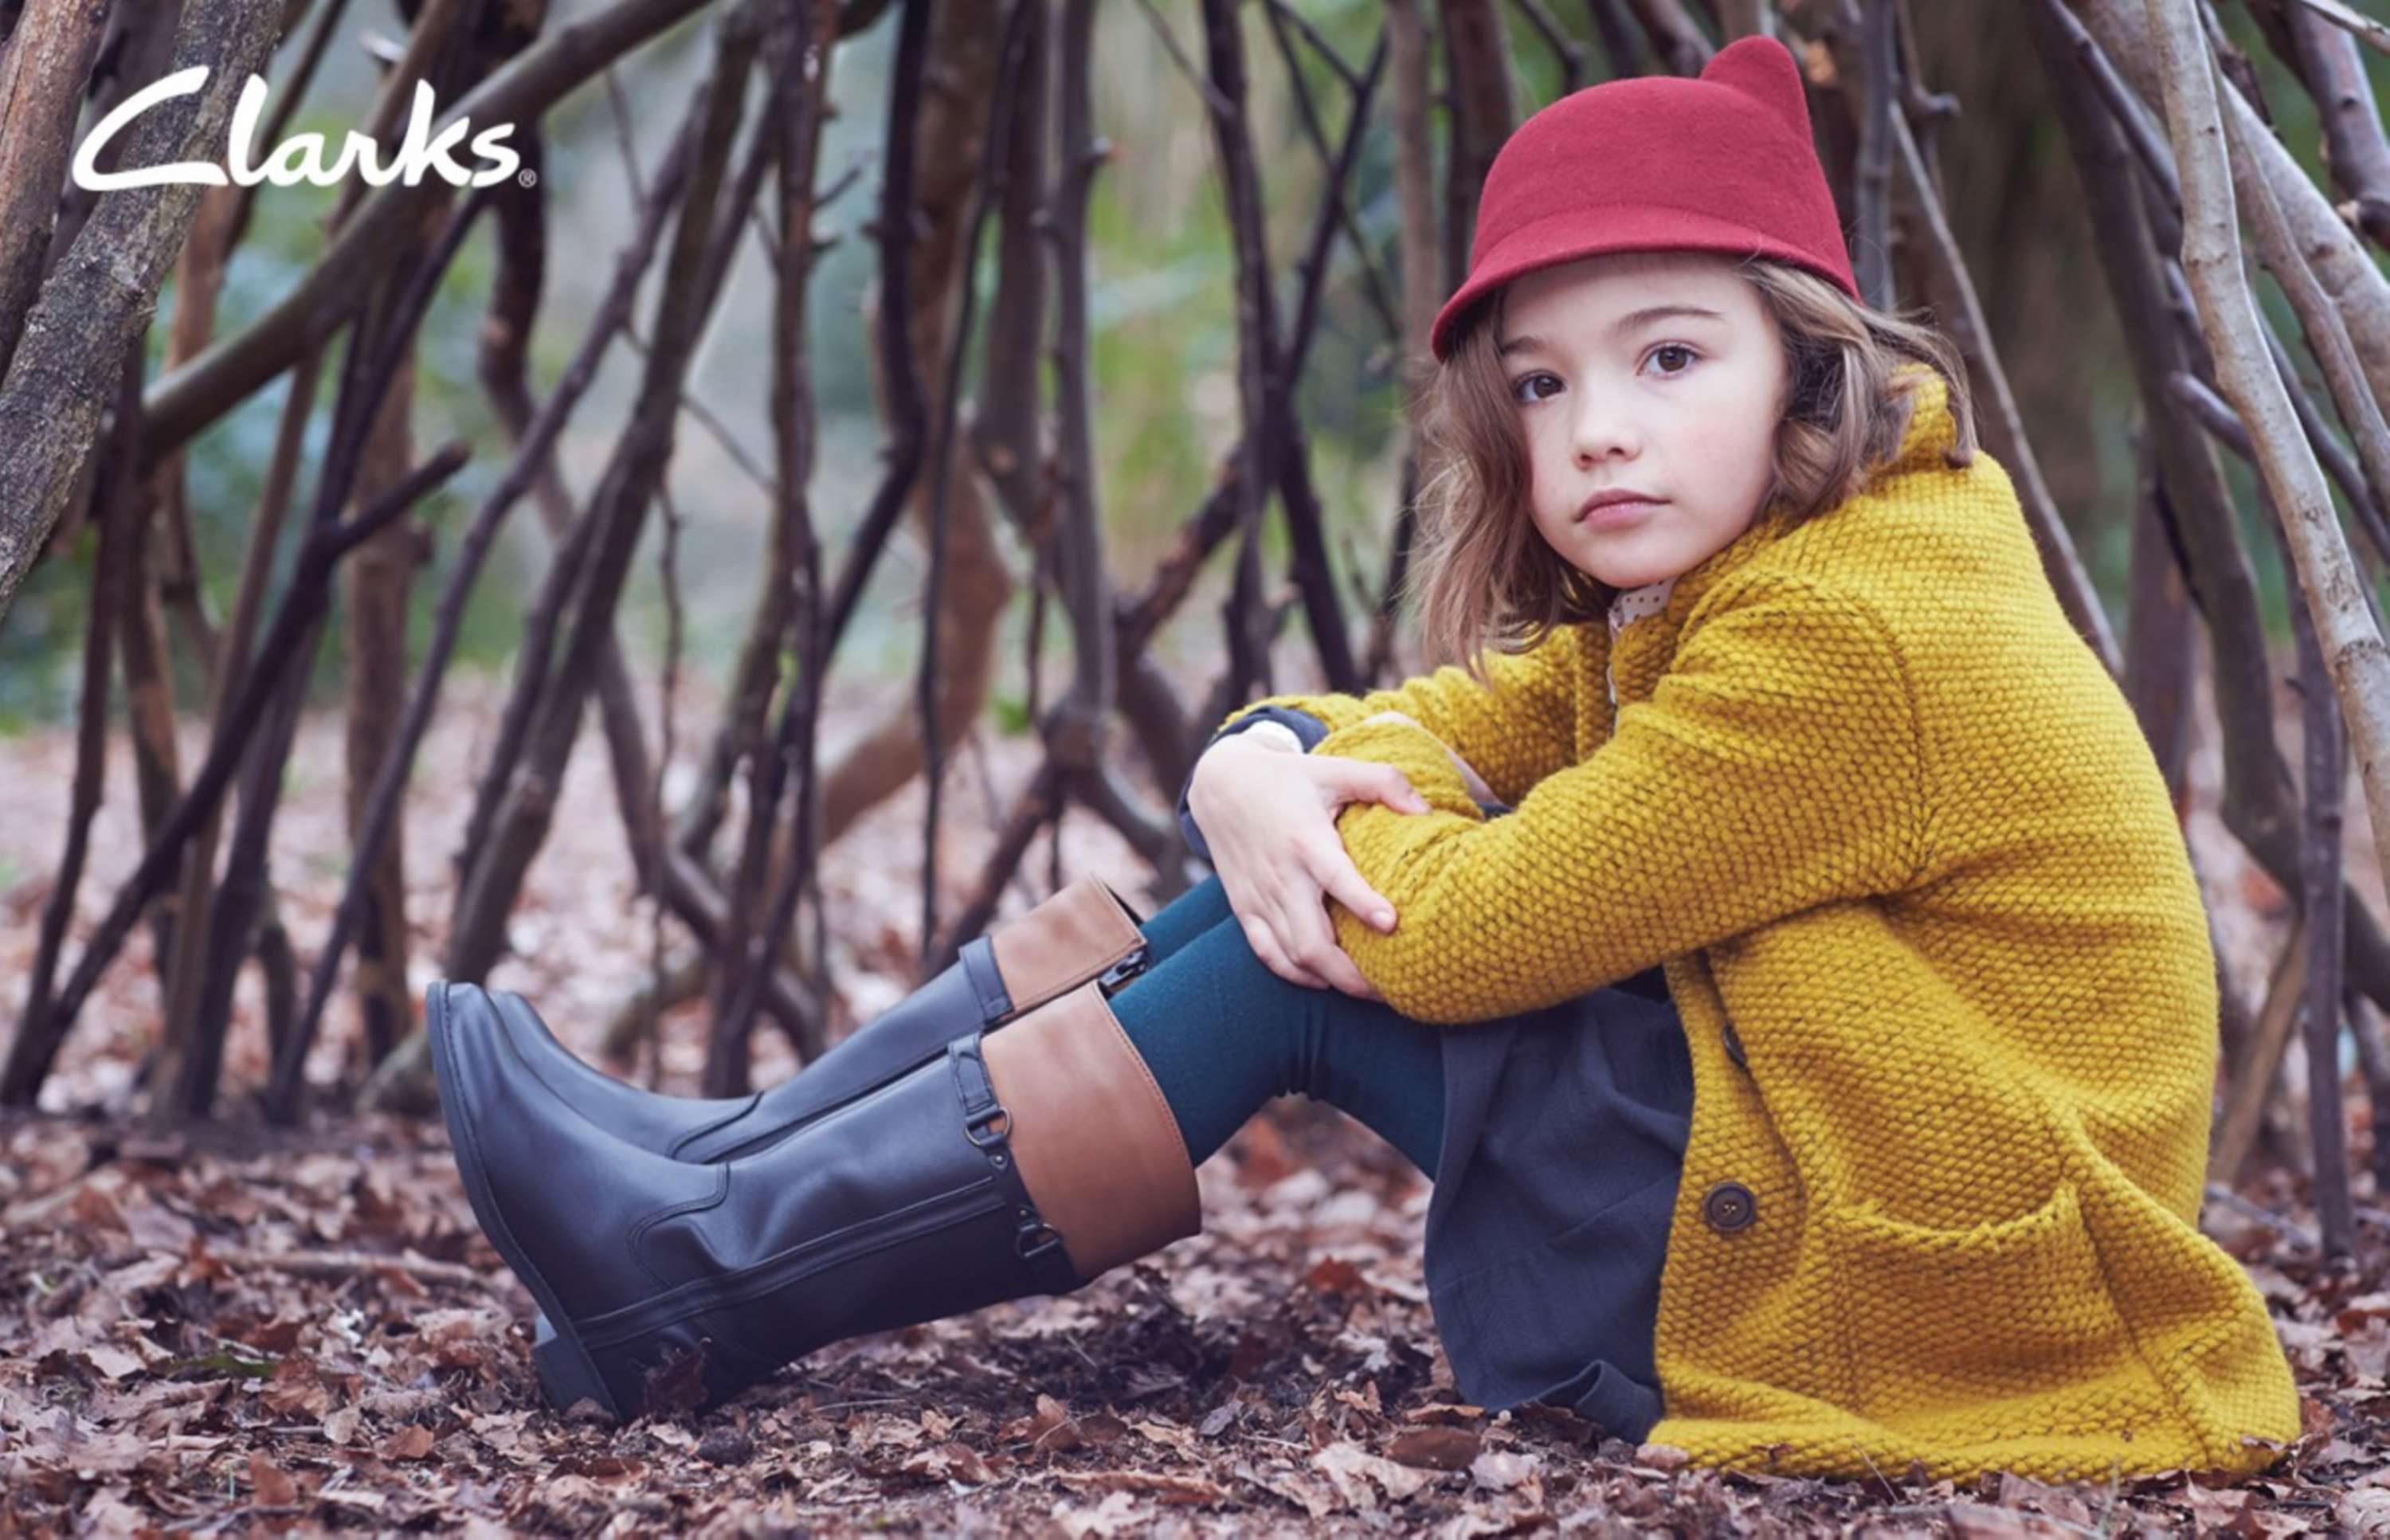 Clarks Kids AW15 — Advertising Campaign | The Dots